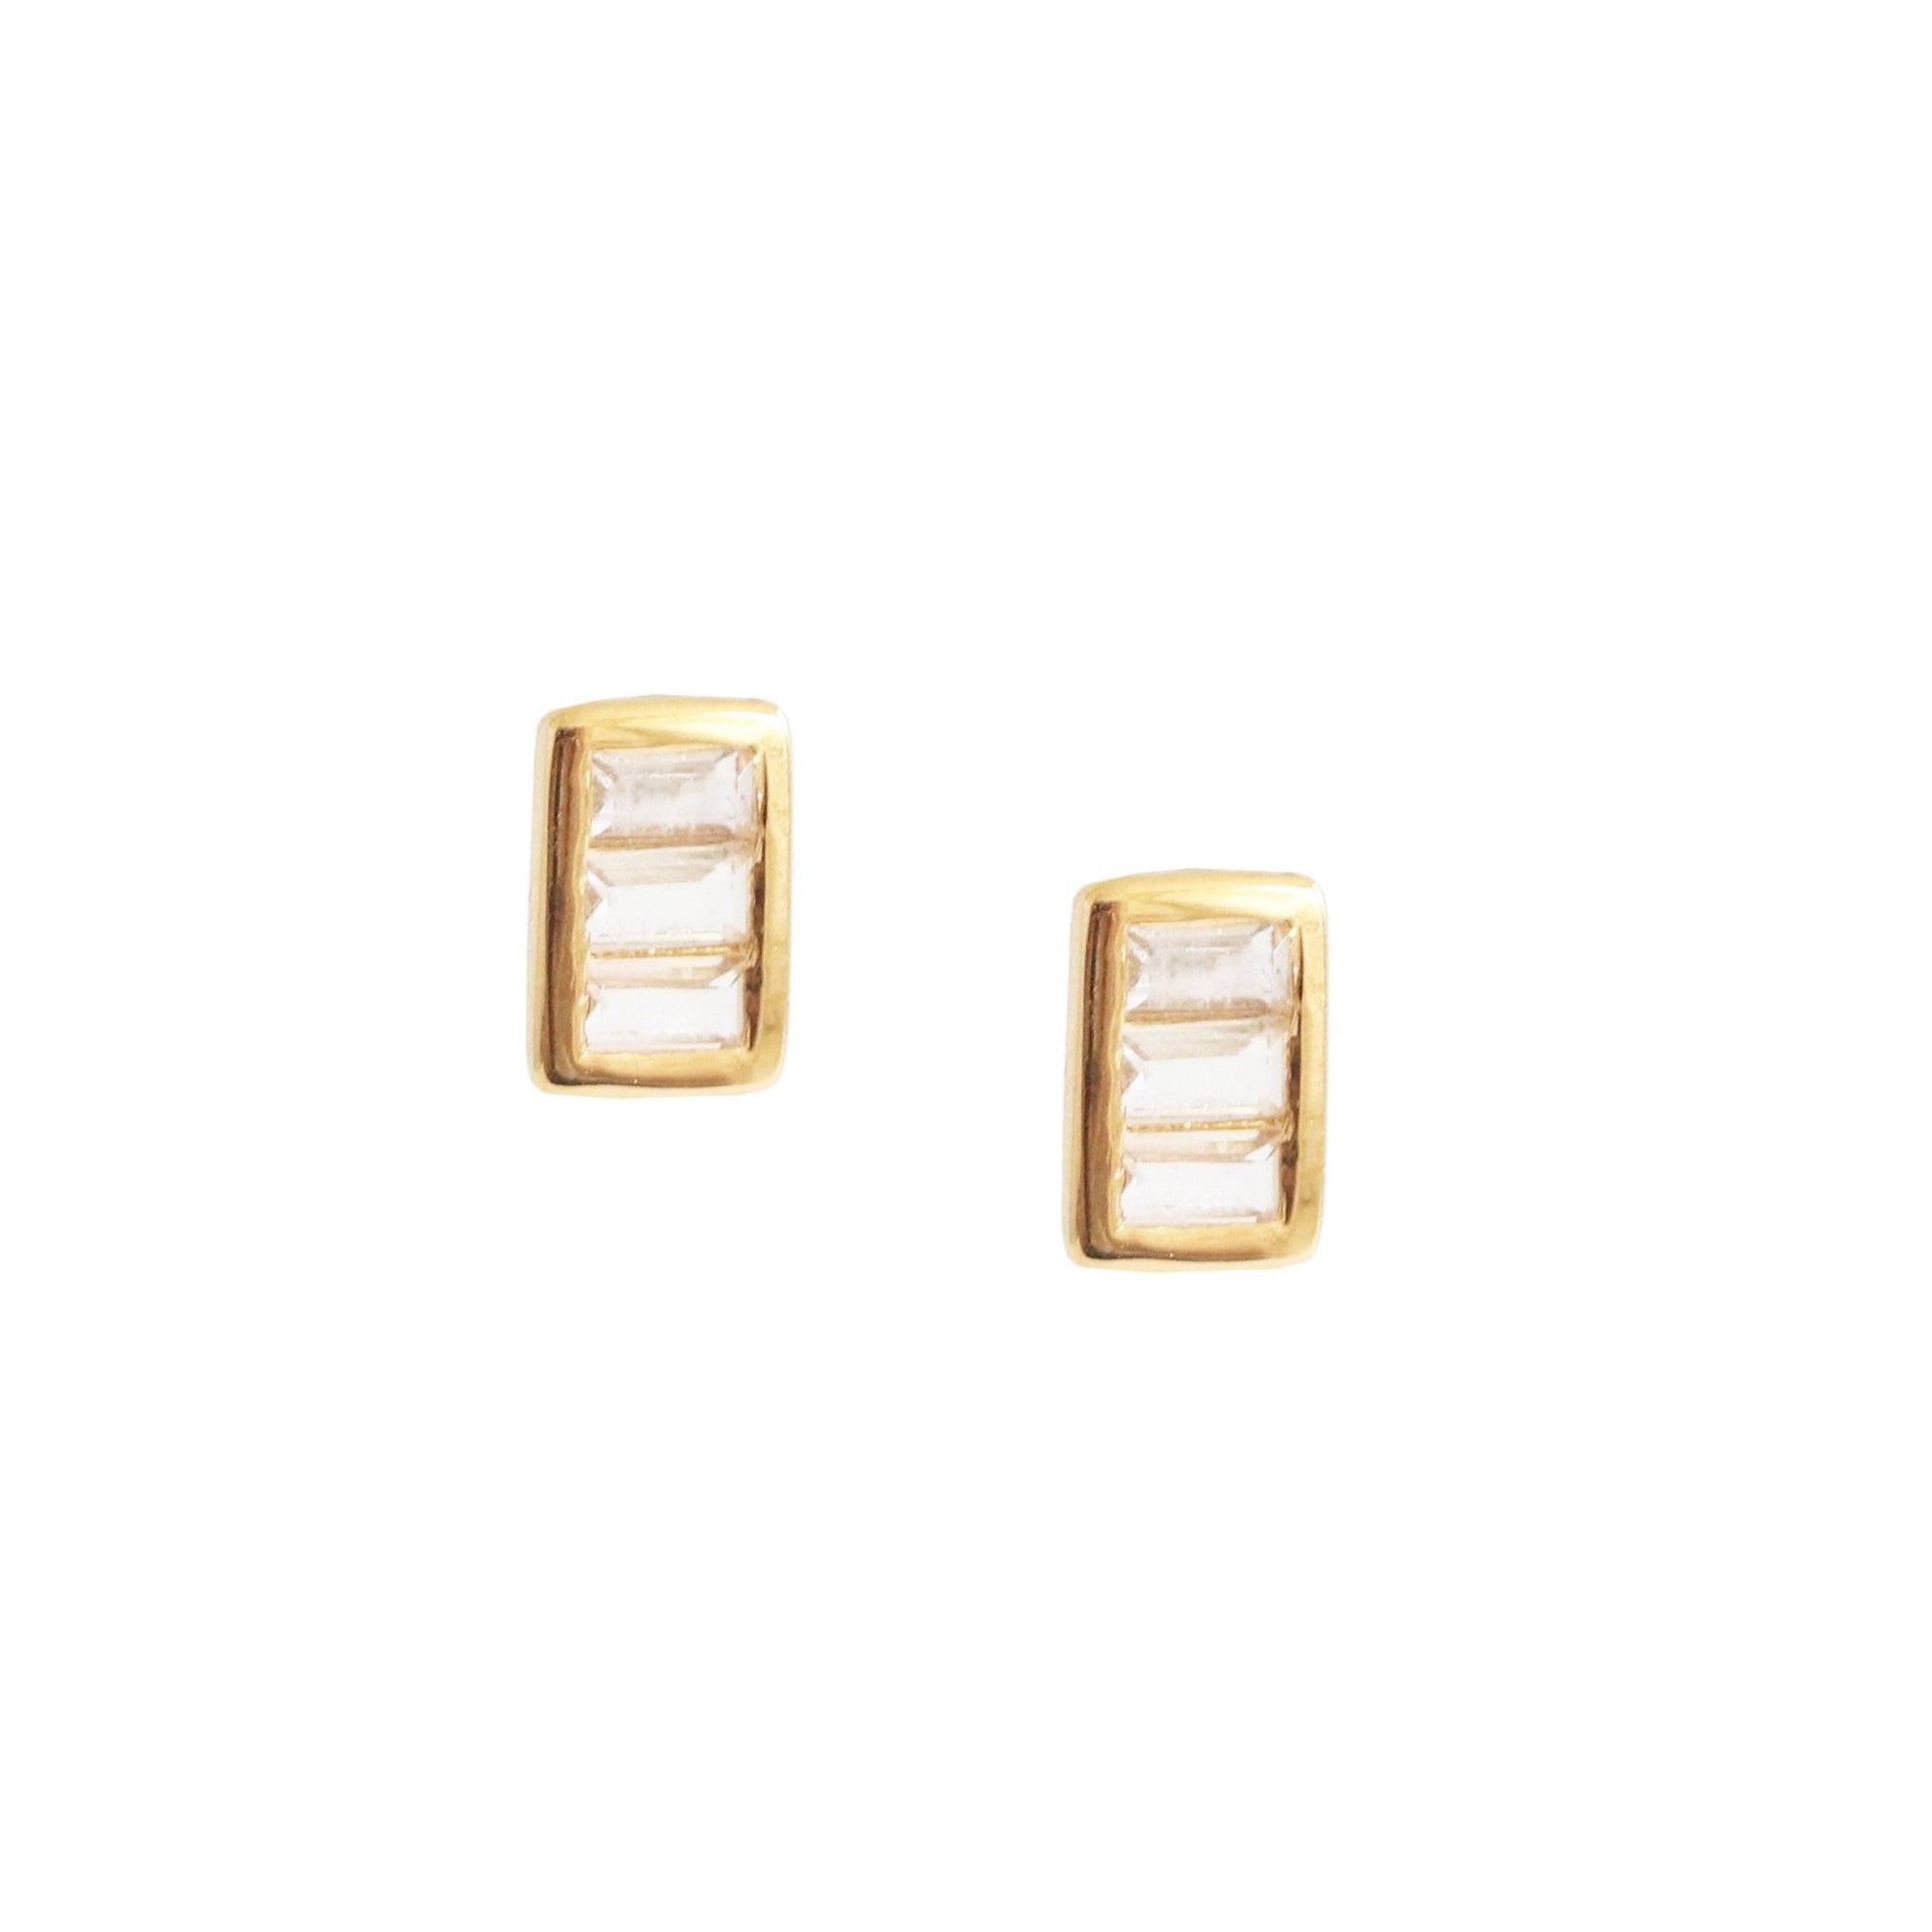 Tiny Loyal Stacked Studs - White Topaz & Gold - SO PRETTY CARA COTTER